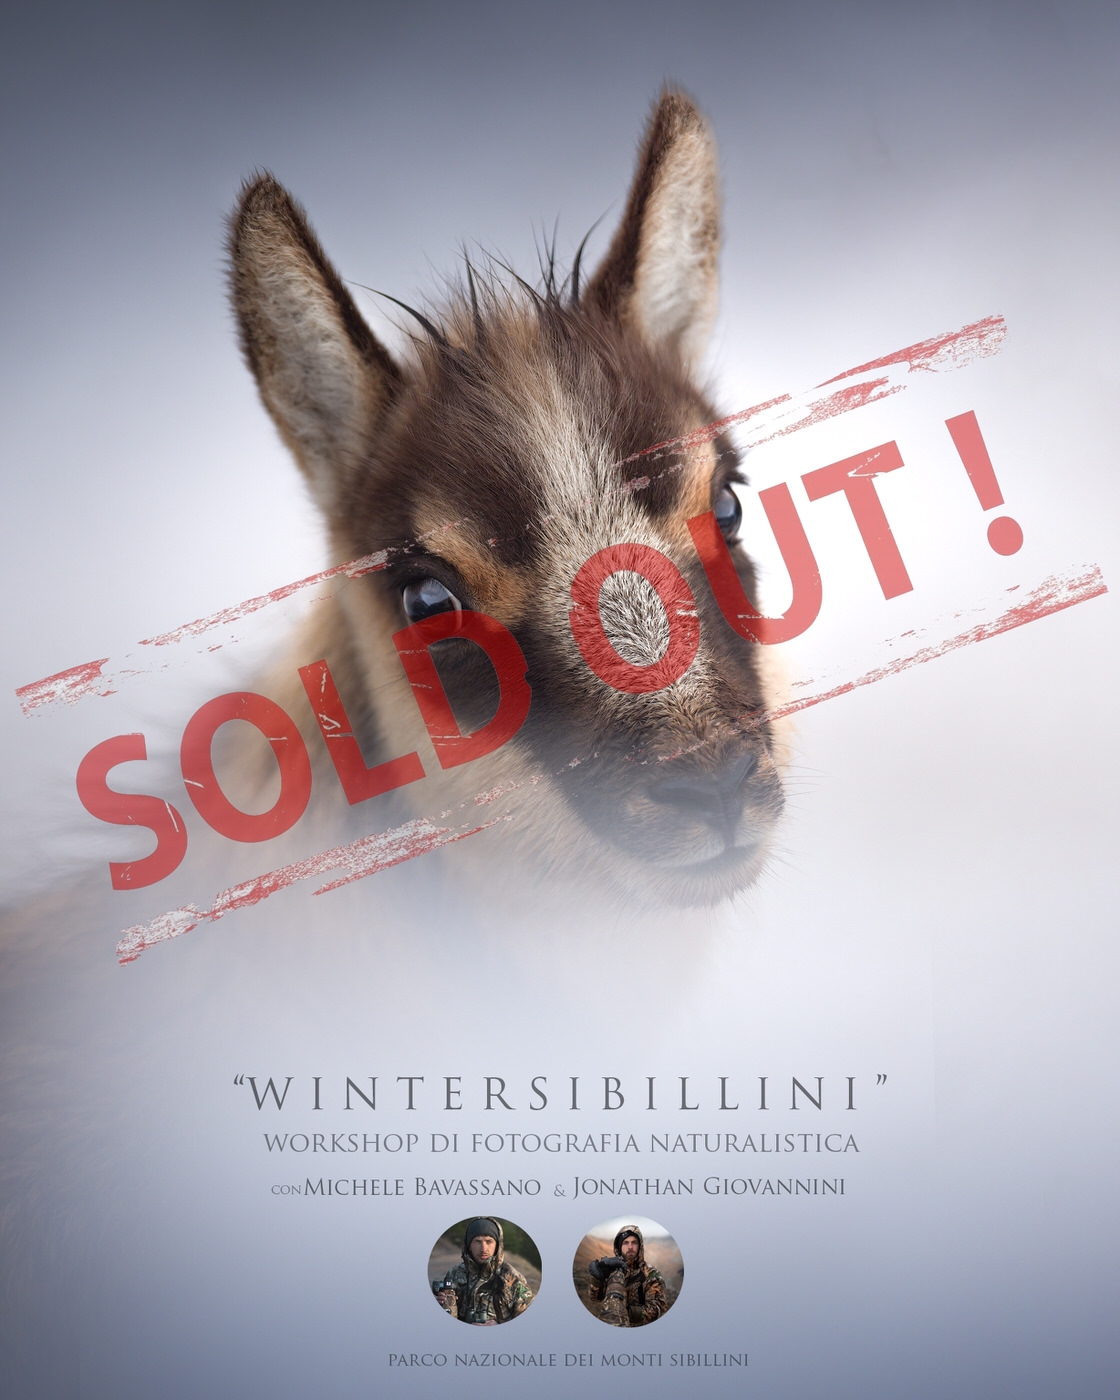 Winter-sibillini- sold out